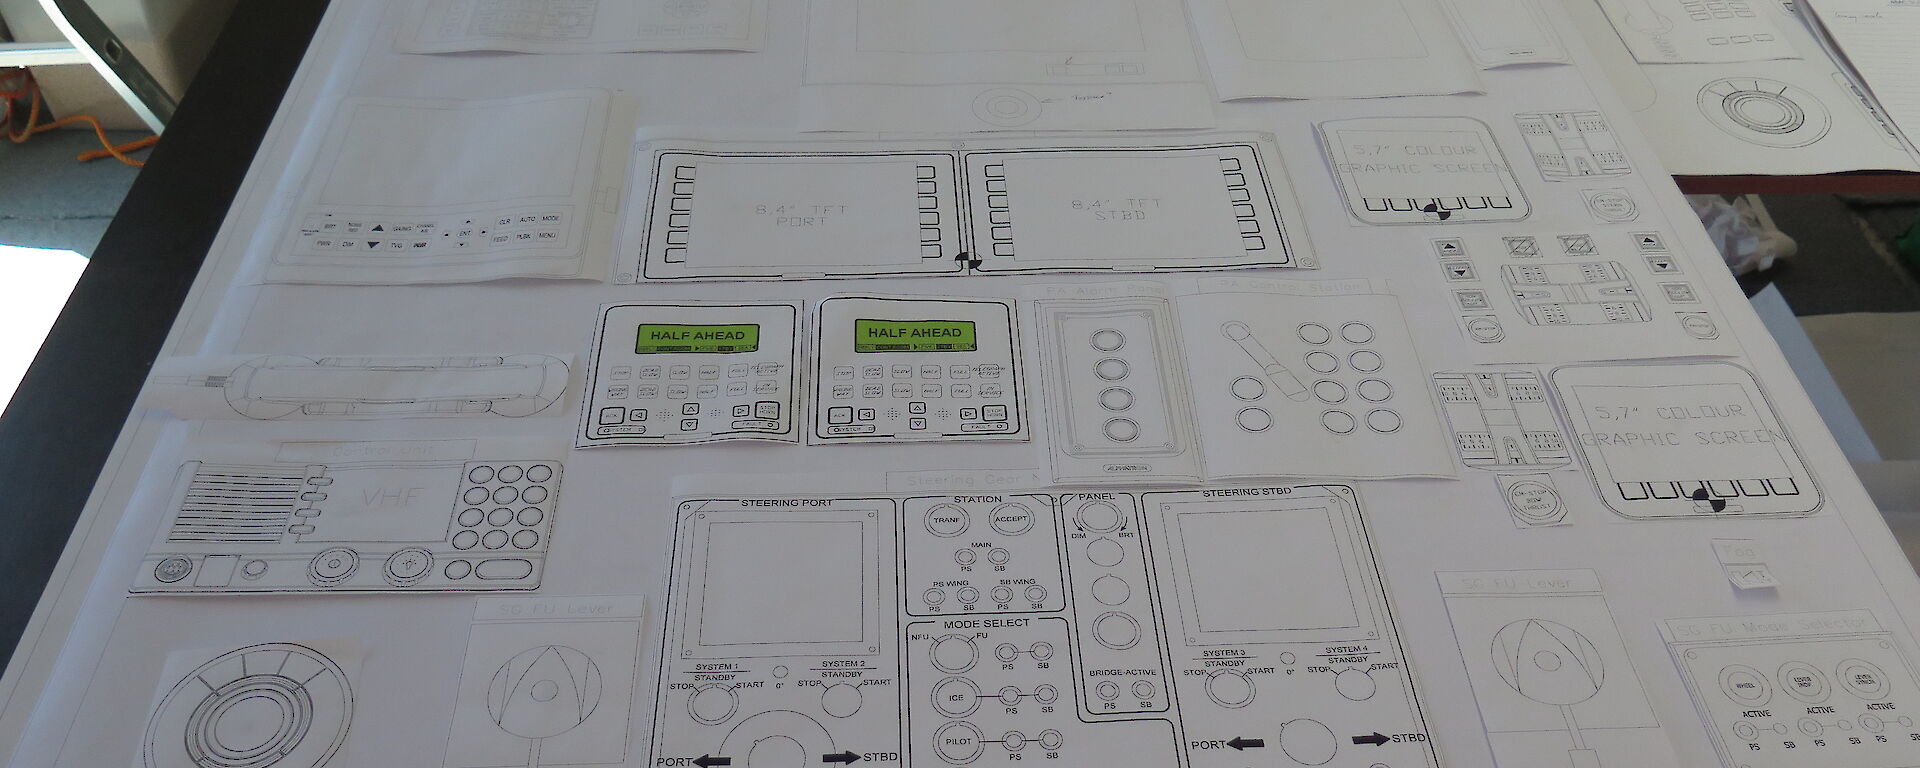 A 1:1 scale mock-up on paper of the central conning console.